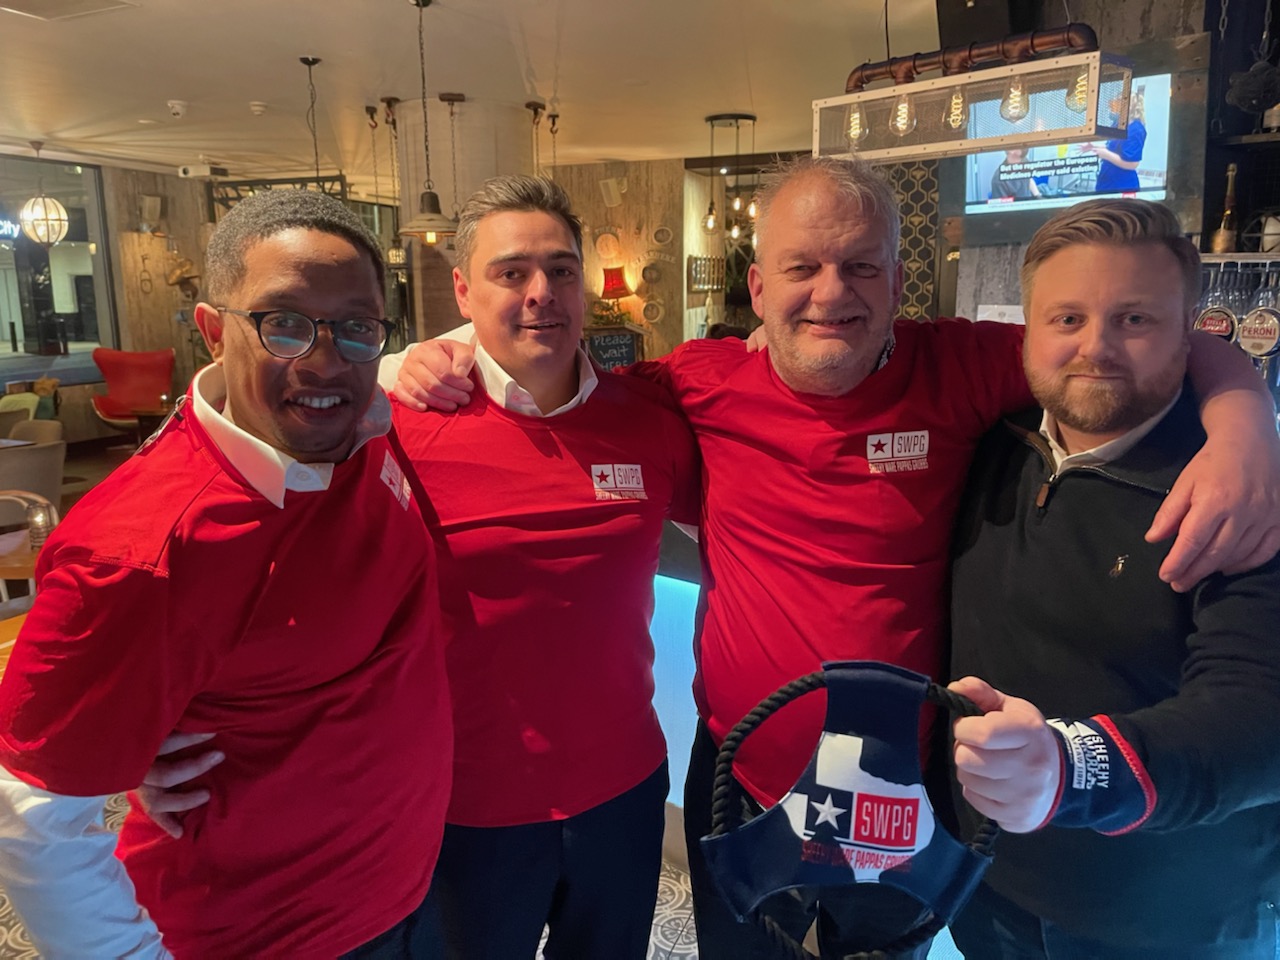 Sheehy, Ware, Pappas and Grubbs Attorney, Steve Grubbs, made a visit to London last week to meet with one of our adjuster clients, Lloyds of London. Check out their new SWPG swag!